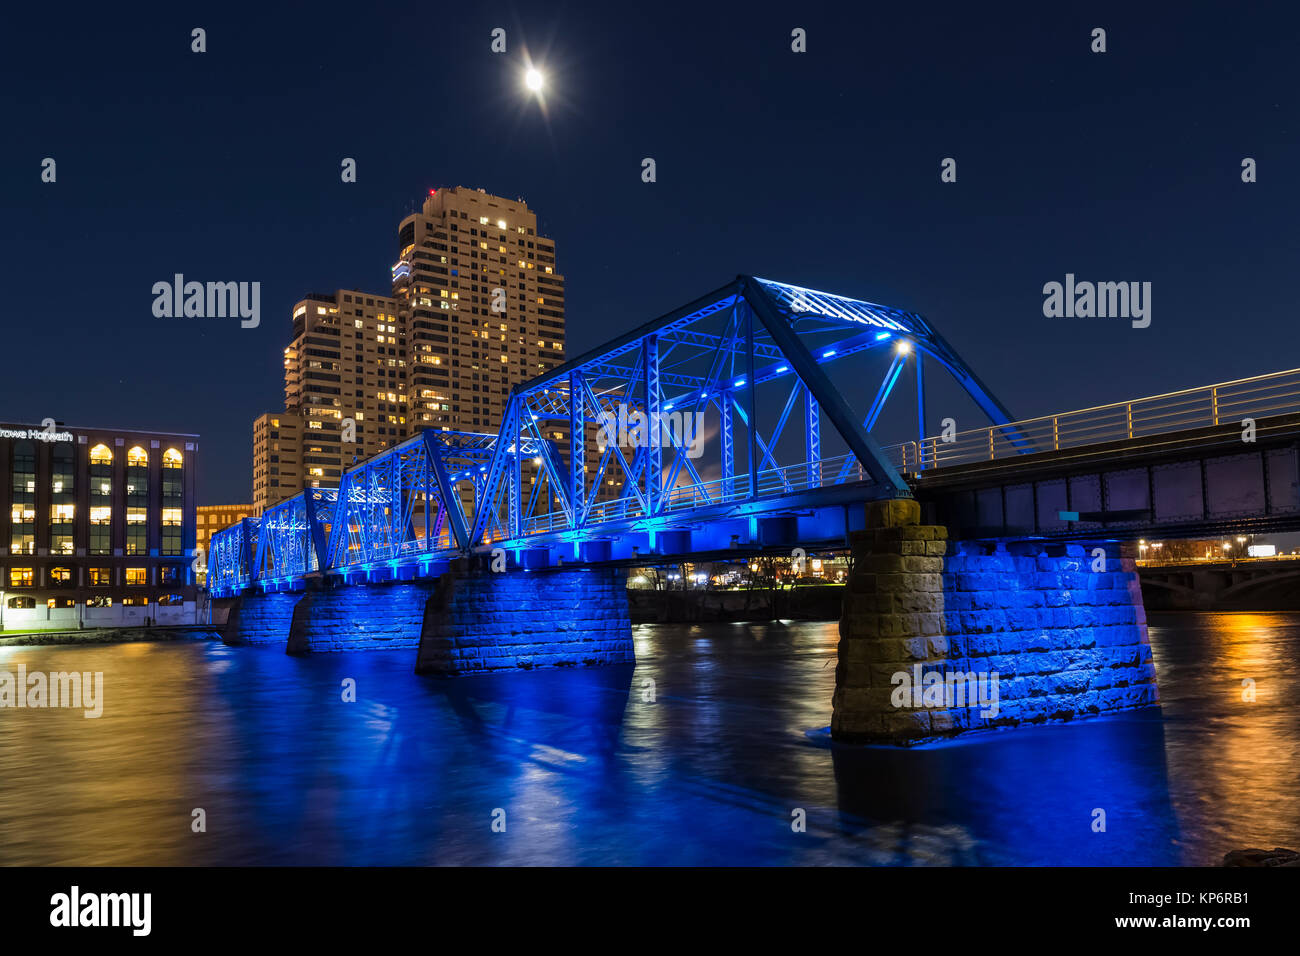 Moon with the Blue Bridge reflecting off the Grand River, viewed at night in Grand Rapids, Michigan, USA Stock Photo